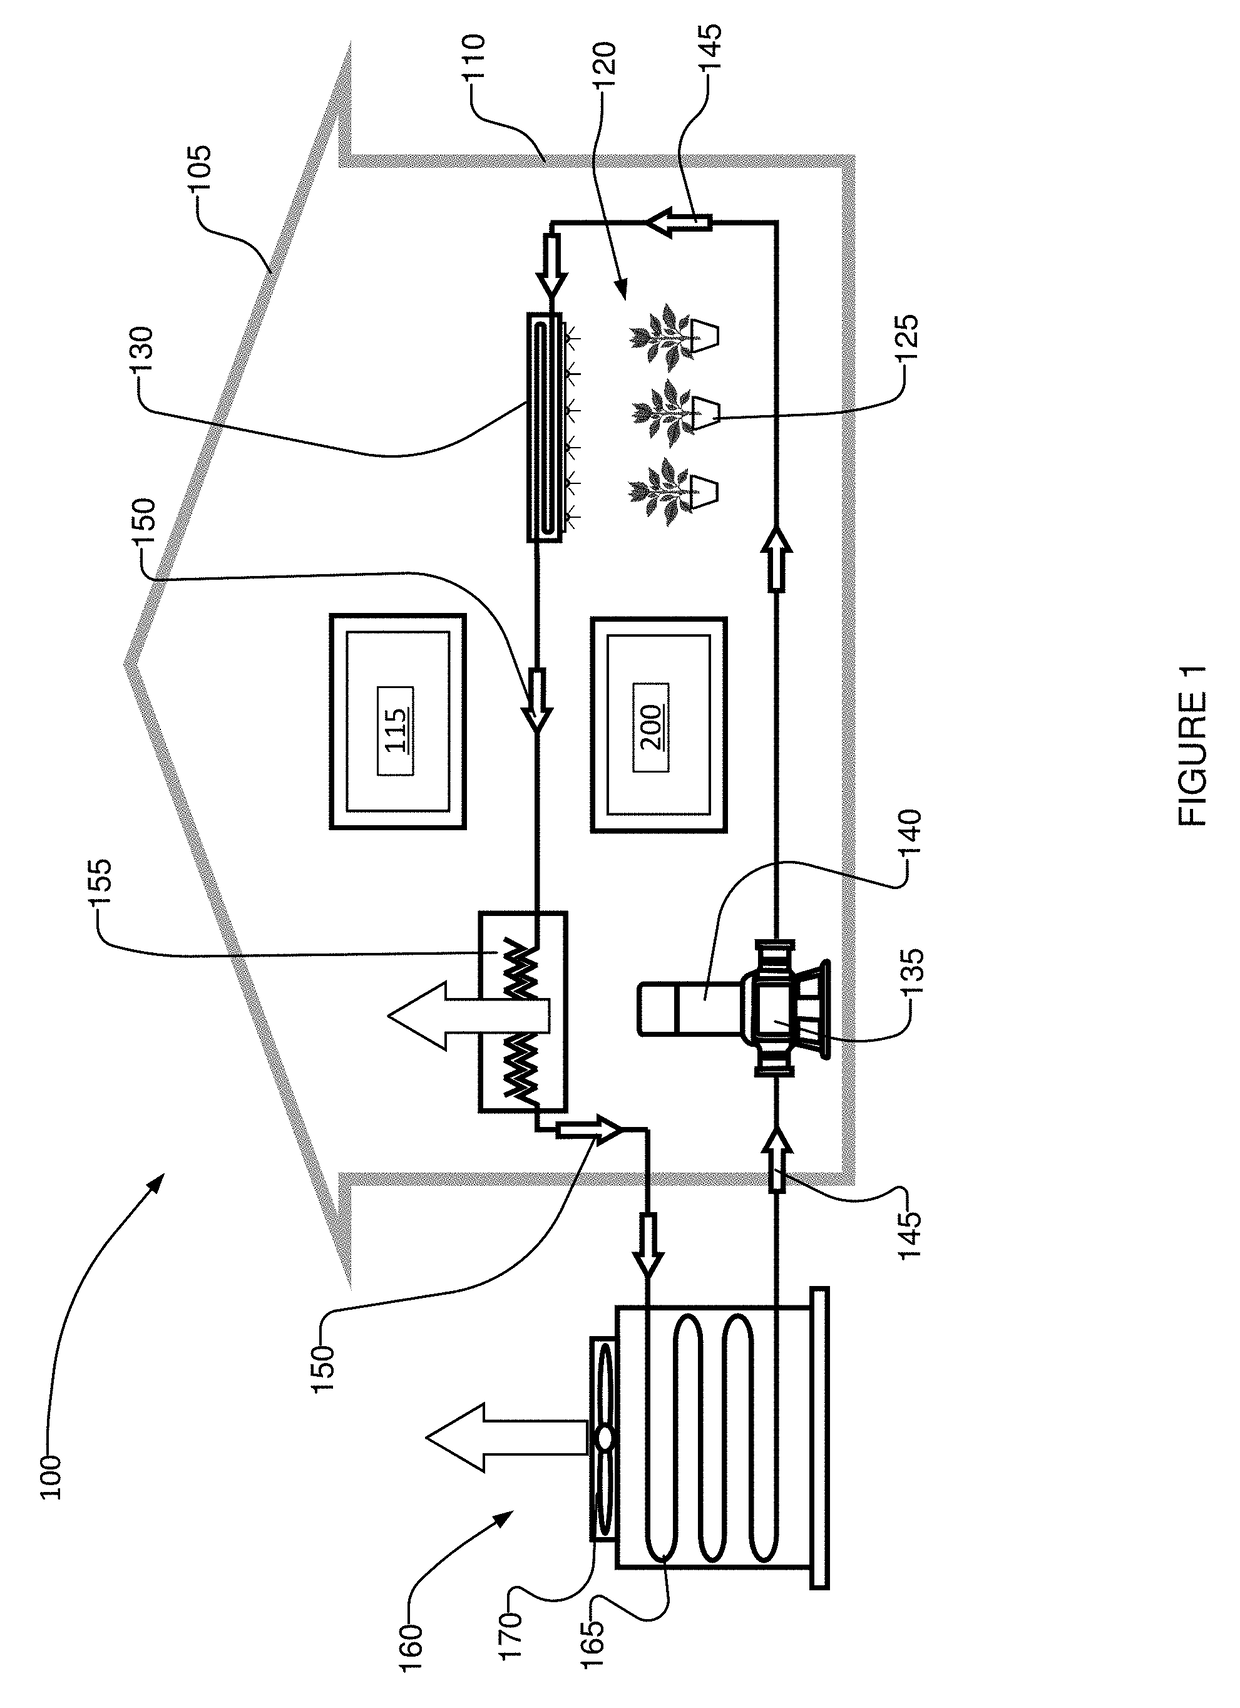 LED lighting system and operating method for irradiation of plants